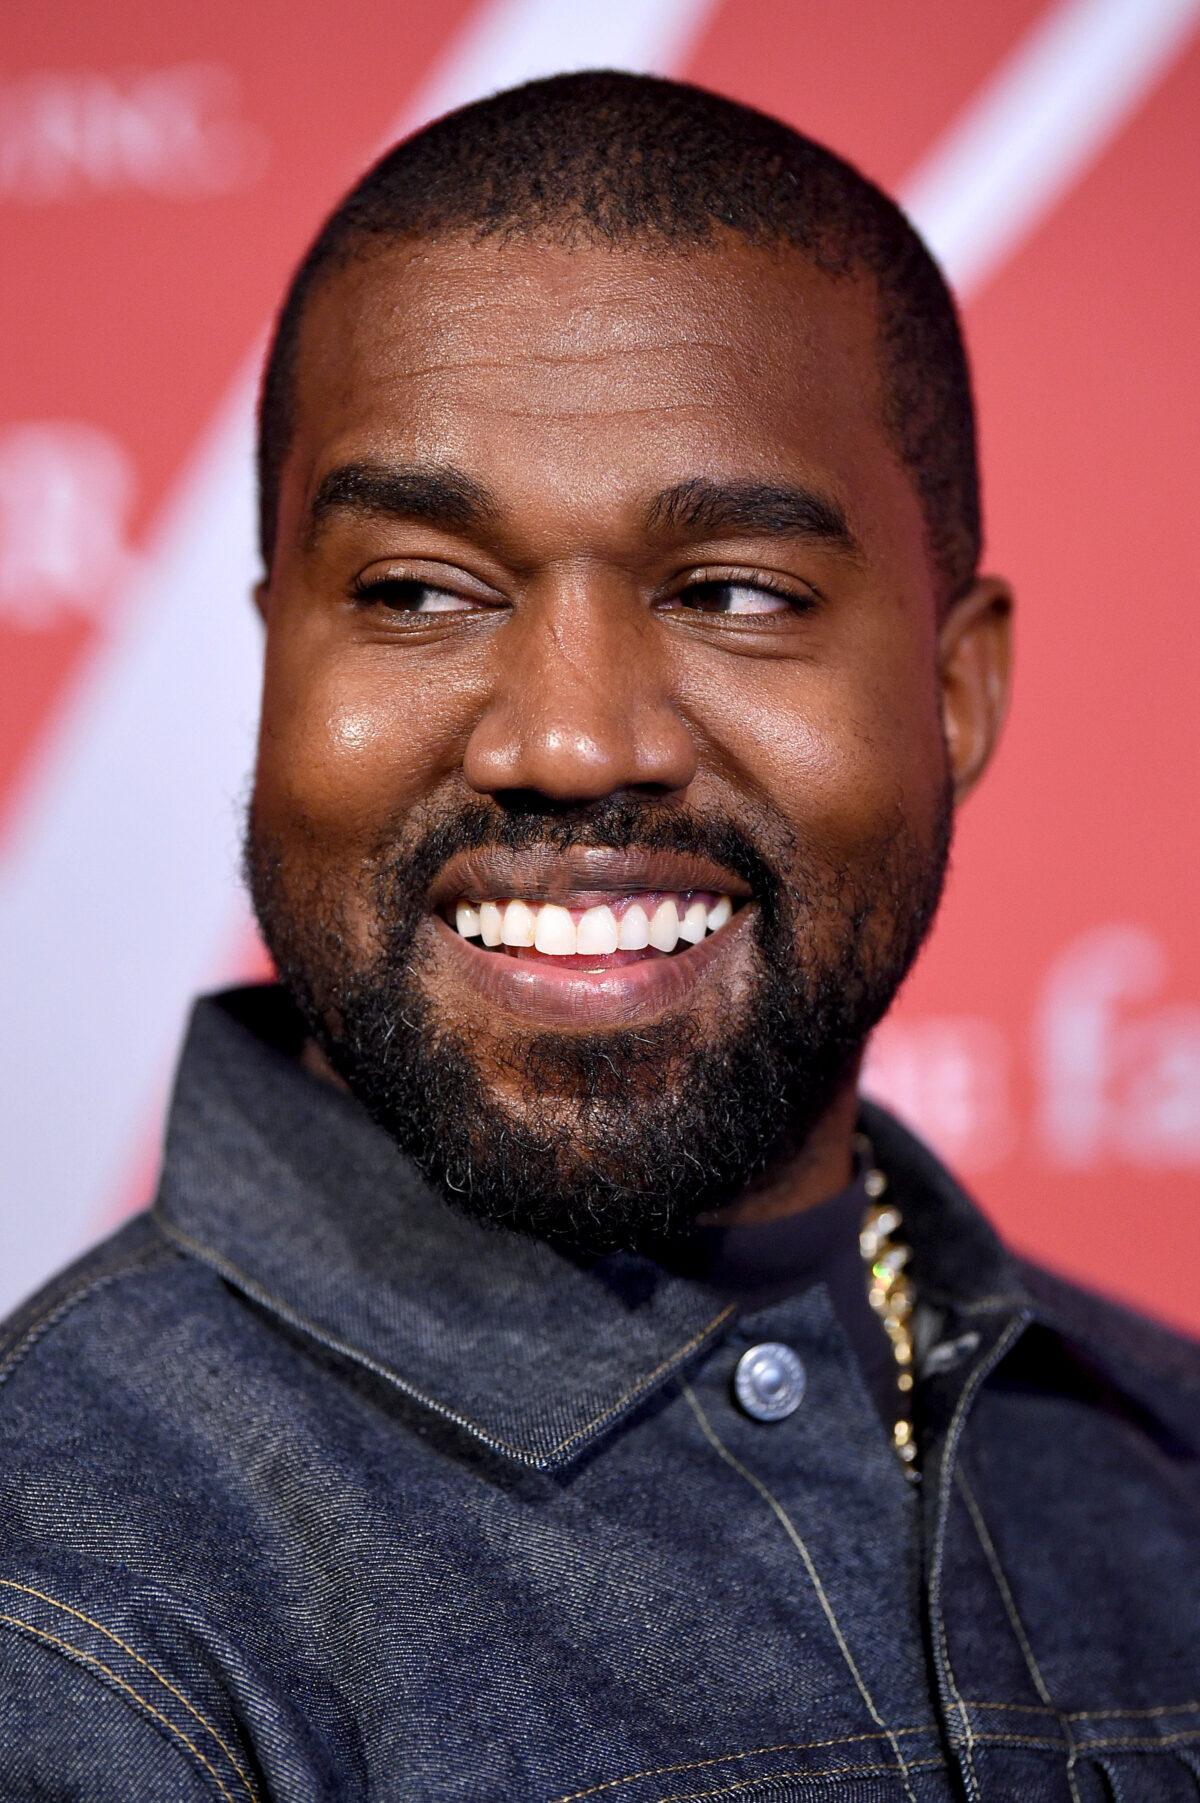 Kanye West attends the 2019 FGI Night Of Stars Gala at Cipriani Wall Street in New York City on Oct. 24, 2019. (Dimitrios Kambouris/Getty Images)